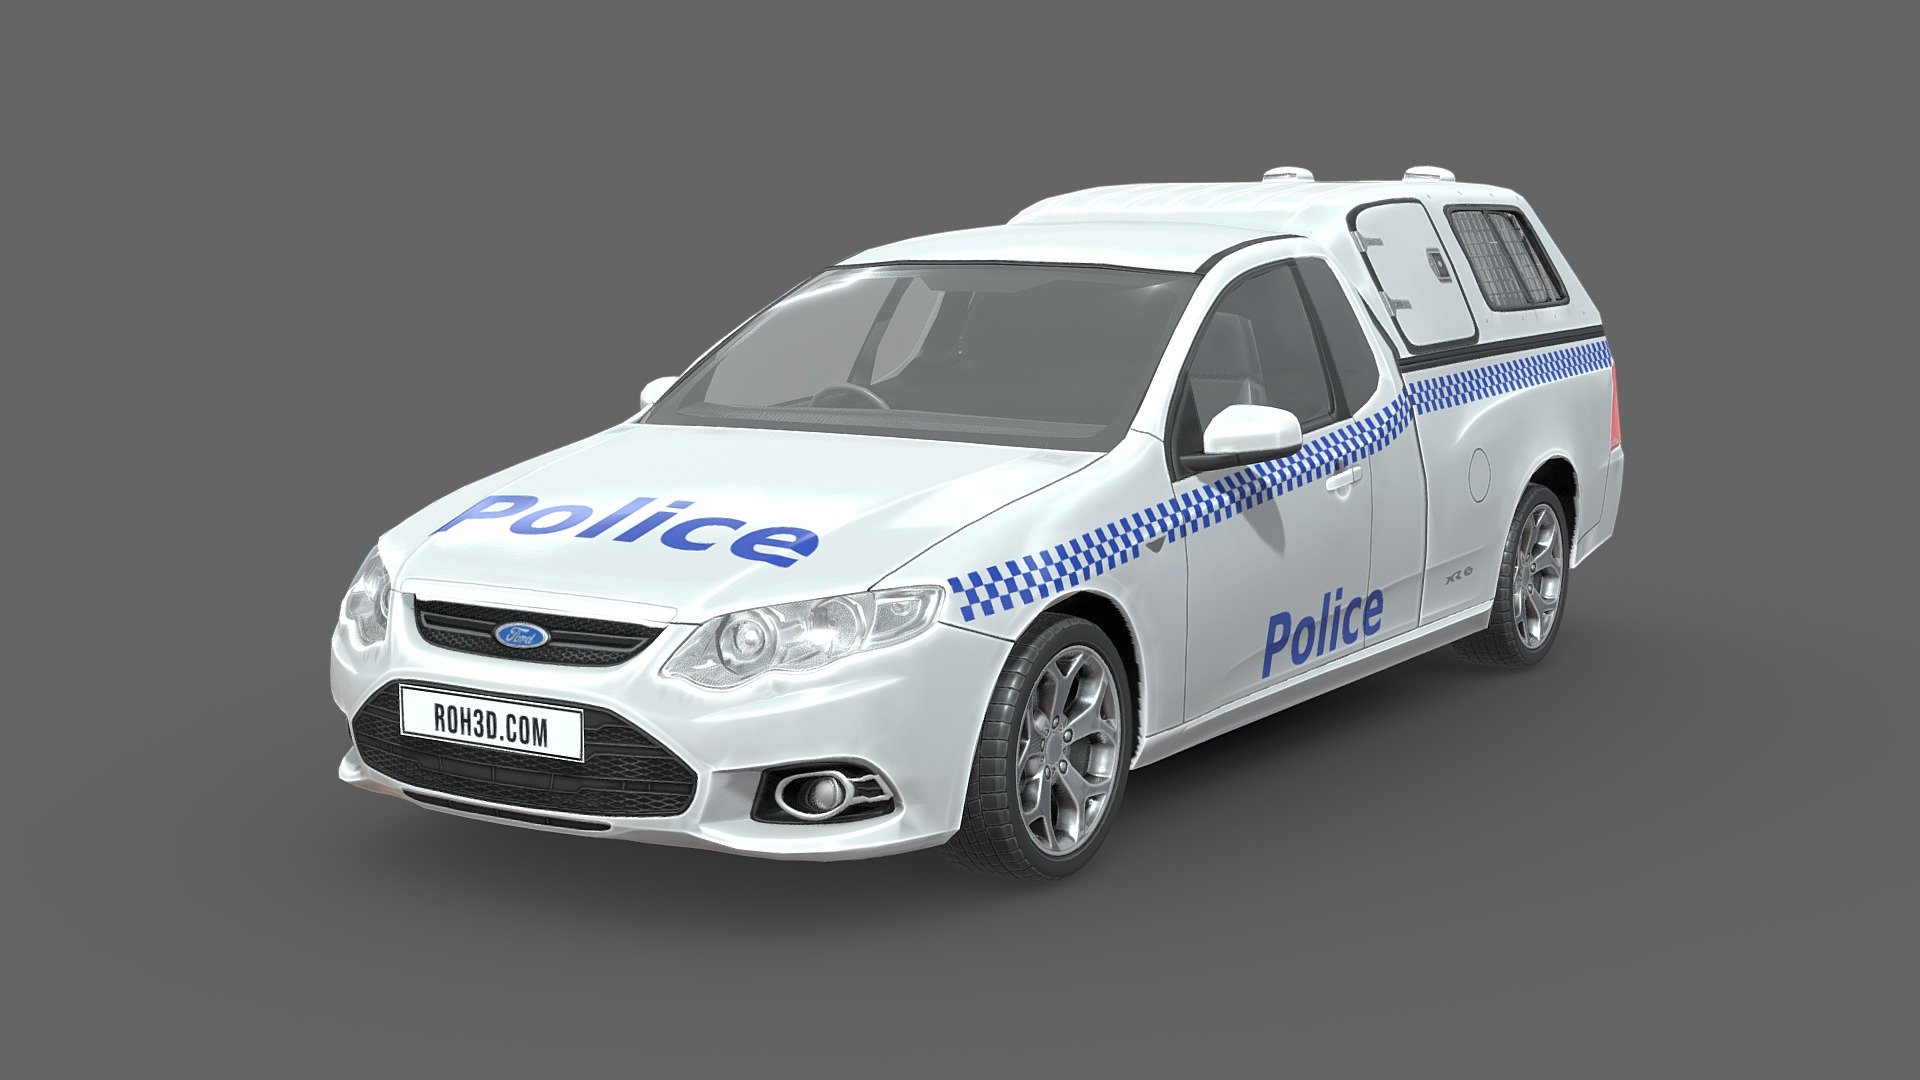 Low Poly Car - Ford Falcon FG UTE Police 2011, nice geometry and surface flow 3d model